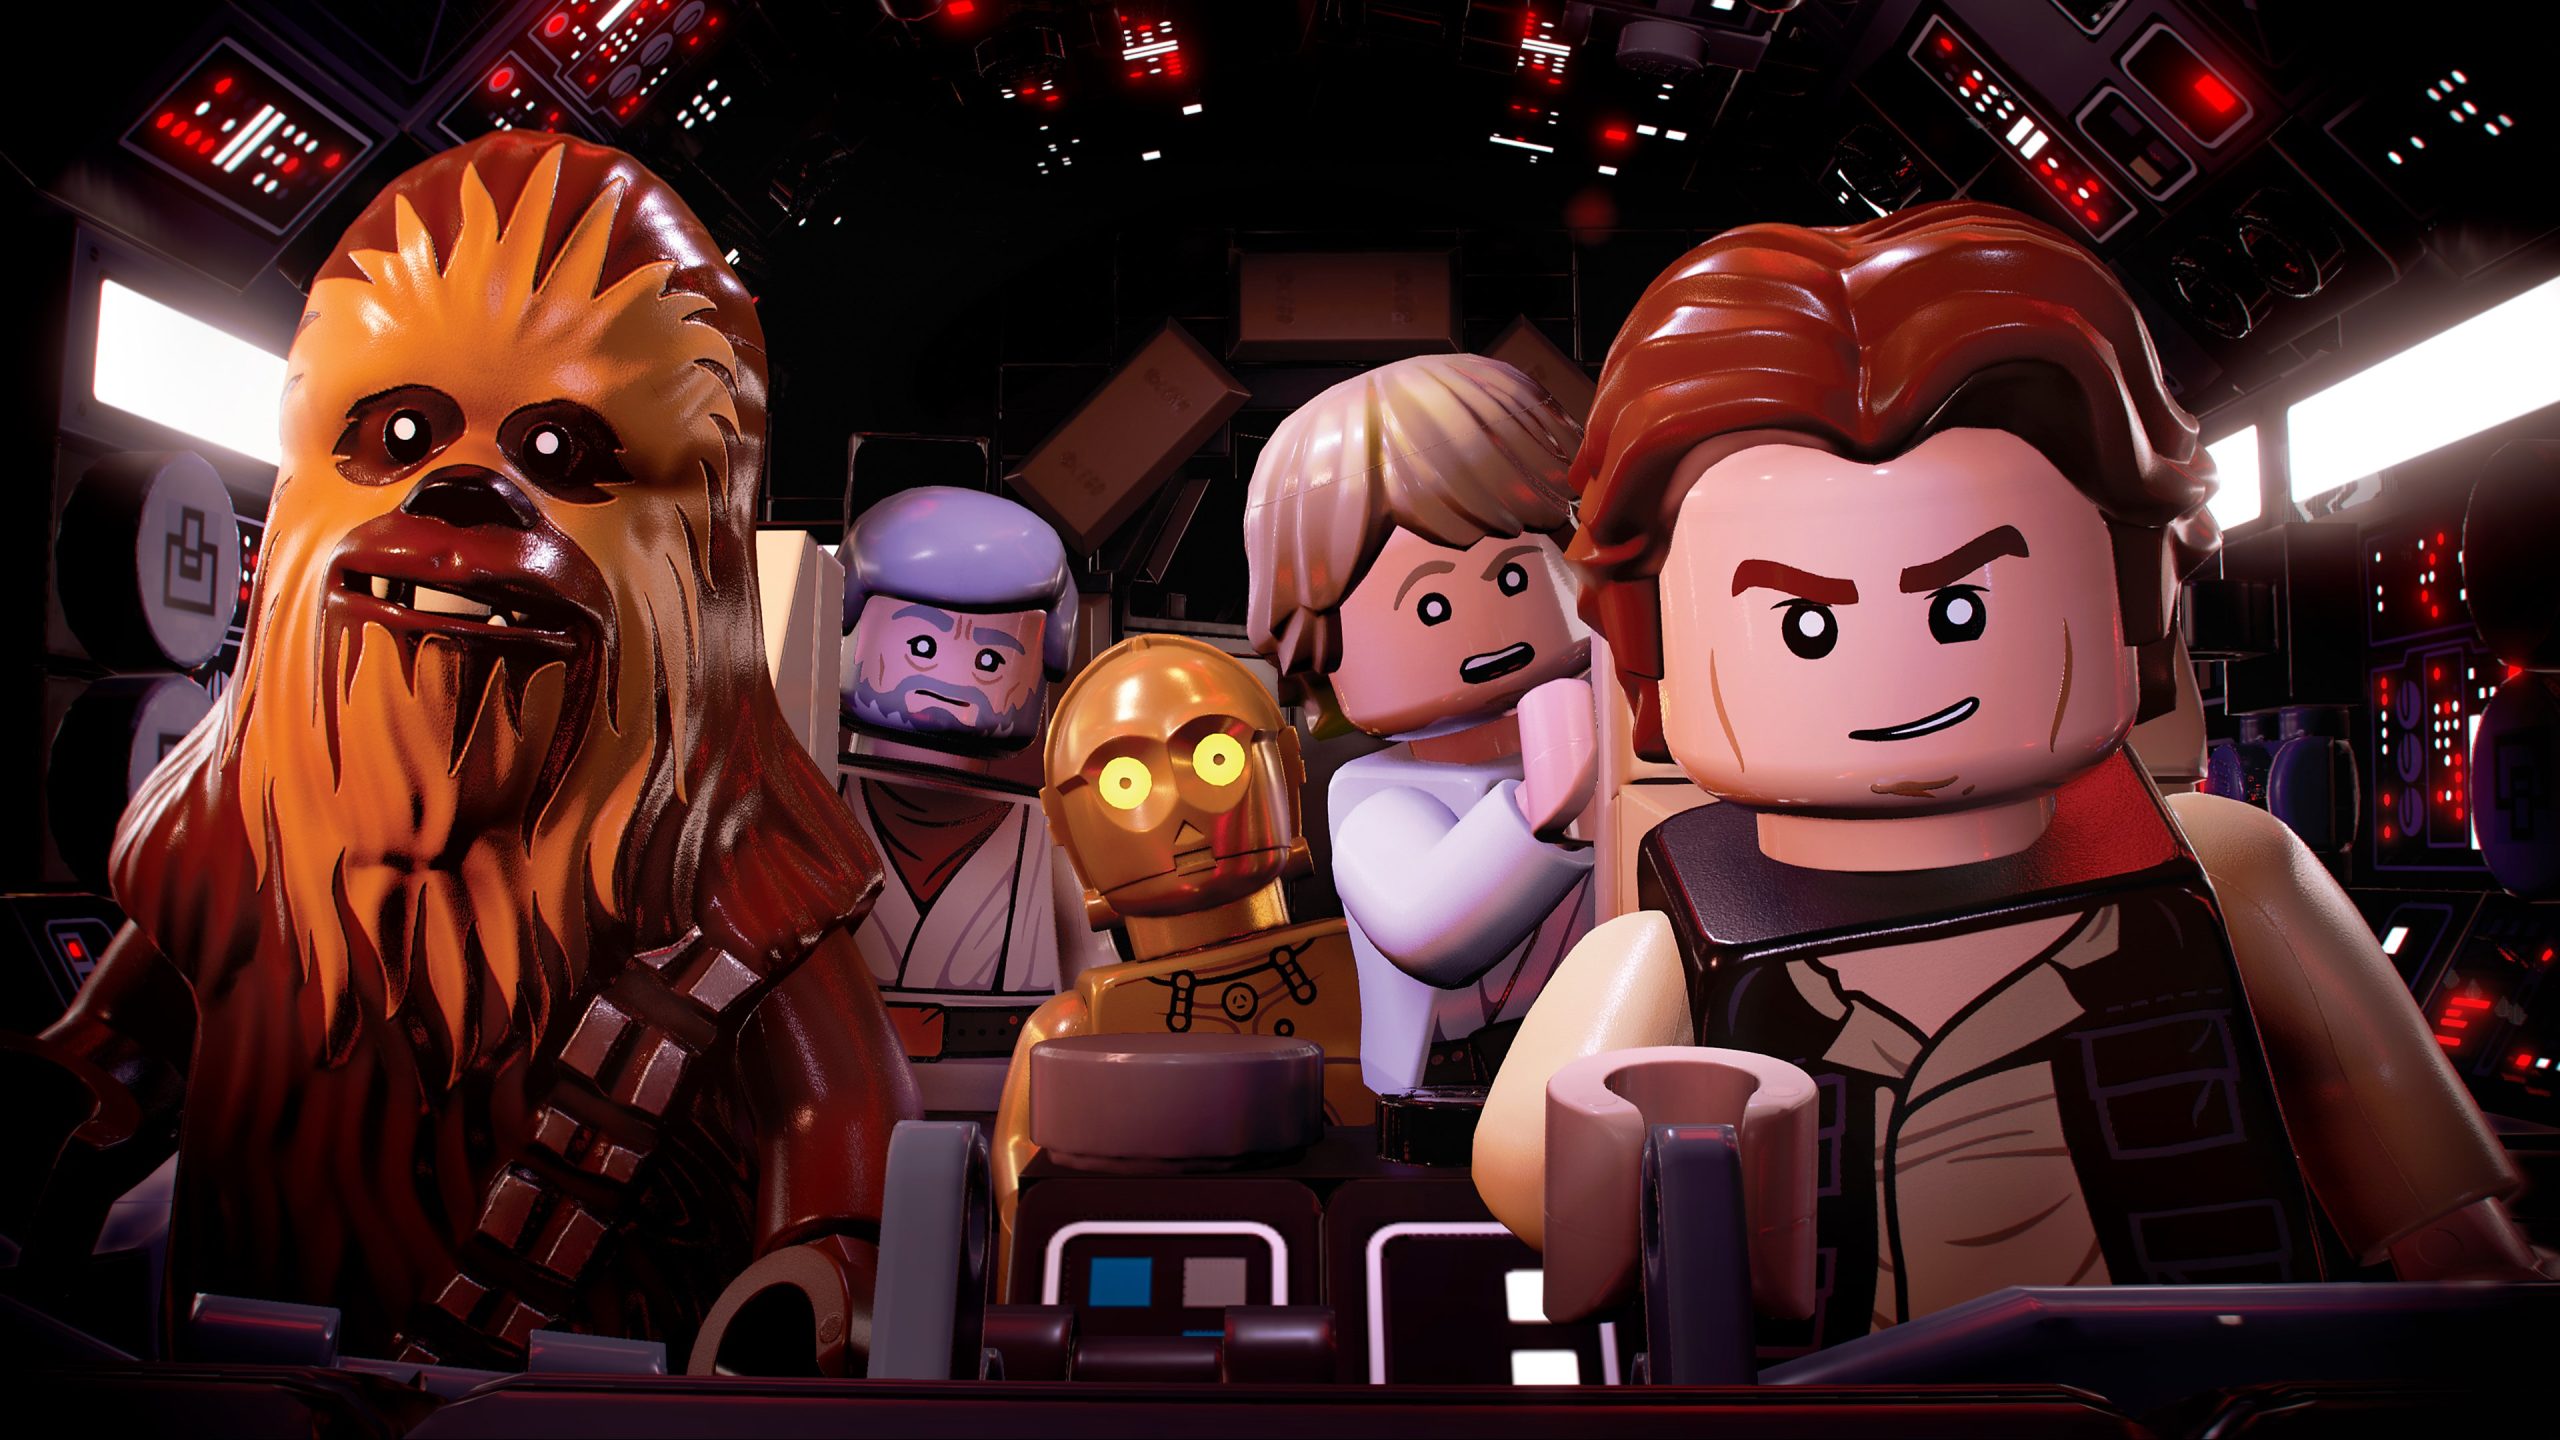 Lego Star Wars: The Skywalker Saga review: At last, THIS is the